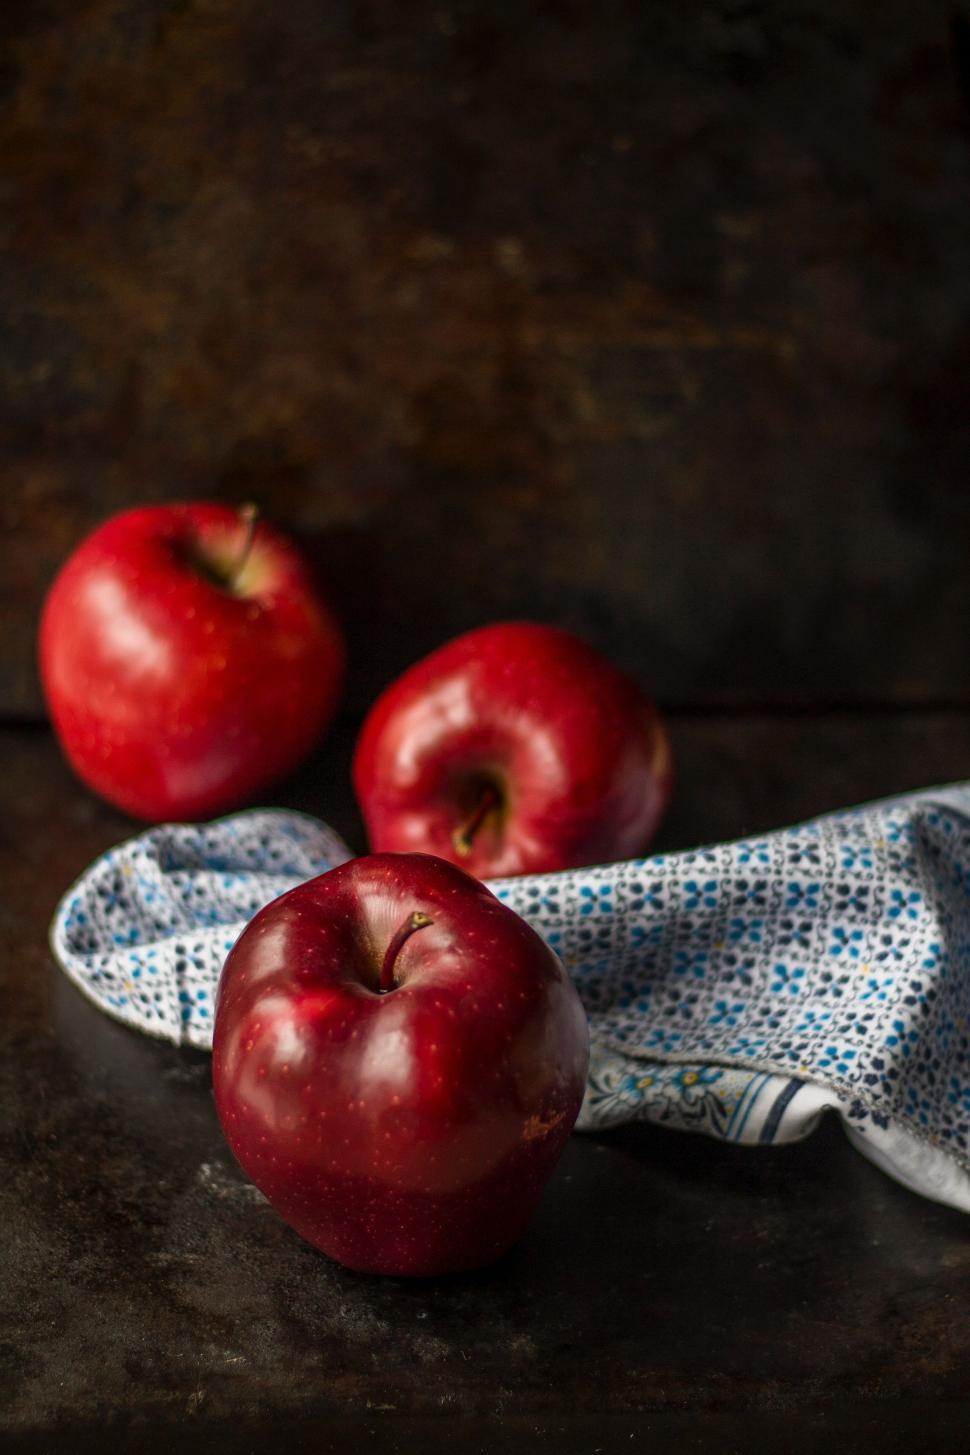 Free Image of Two Red Apples on Cloth 